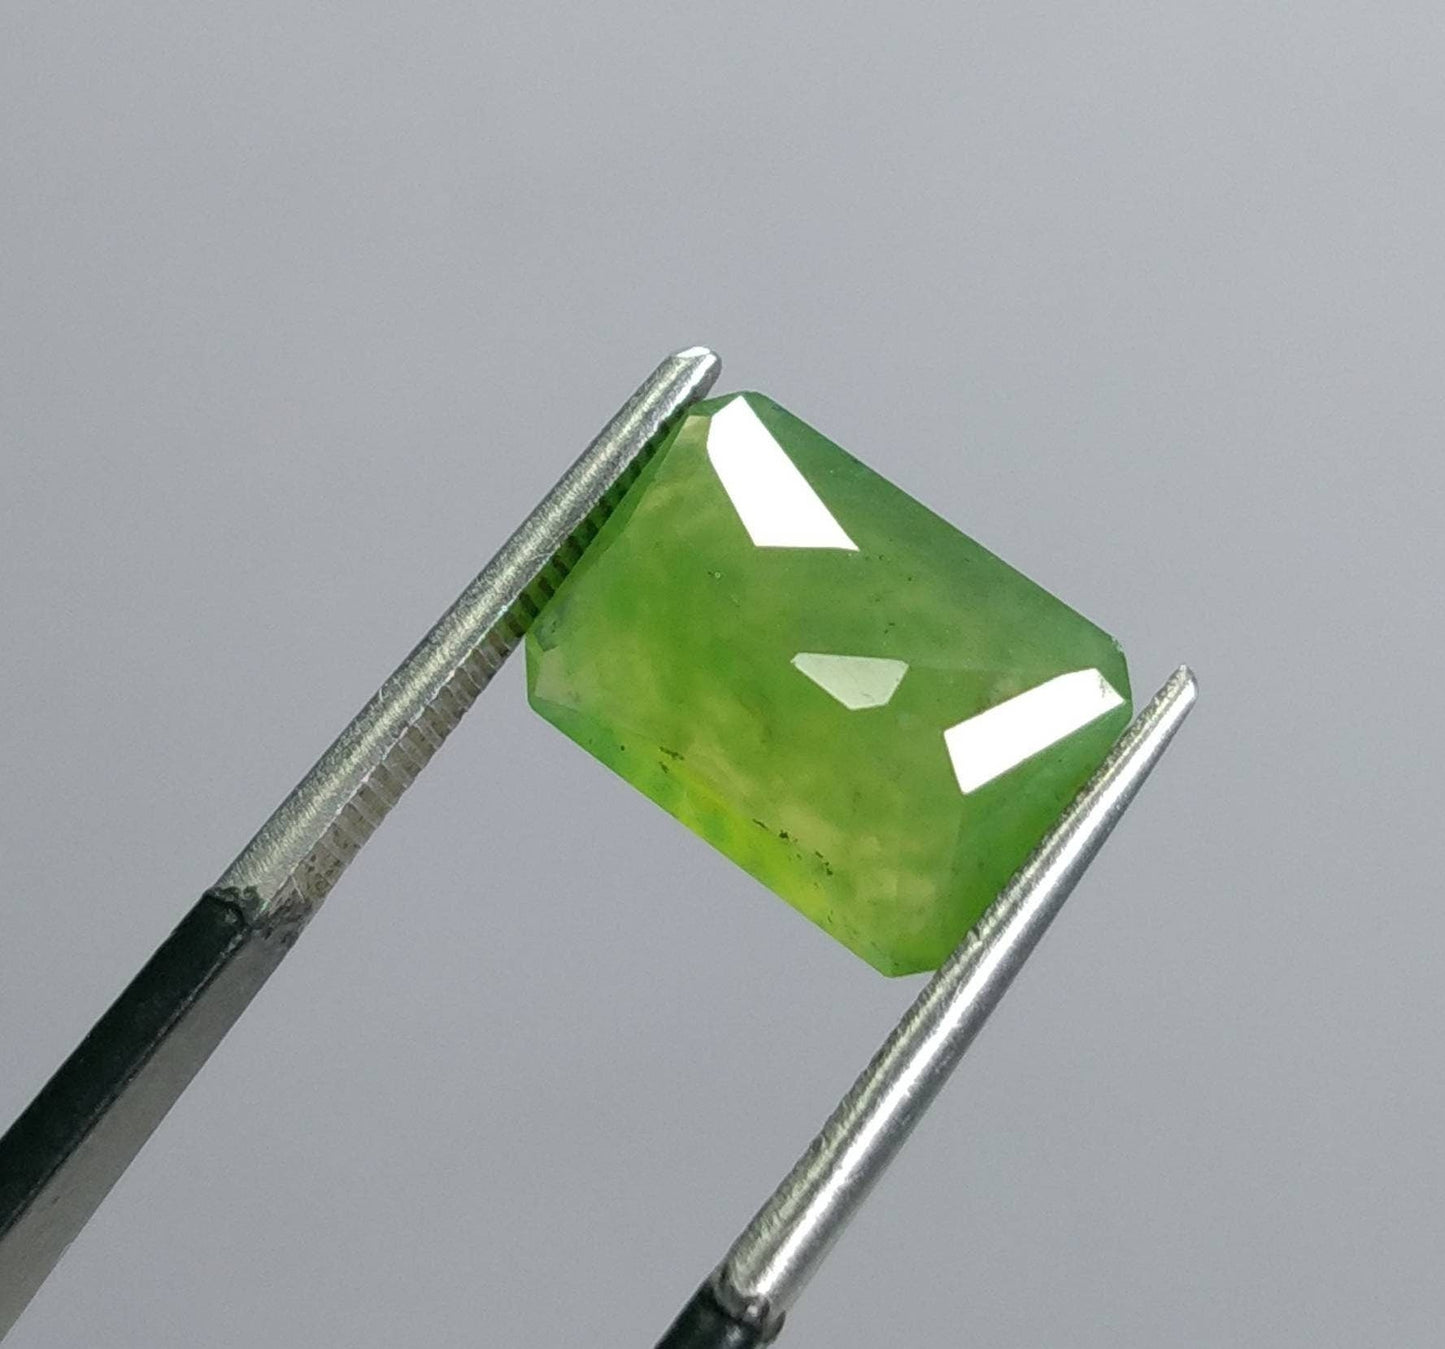 ARSAA GEMS AND MINERALSNatural fine quality beautiful 3.5 carats green radiant cut shape Faceted hydrograssular garnet gem - Premium  from ARSAA GEMS AND MINERALS - Just $11.00! Shop now at ARSAA GEMS AND MINERALS